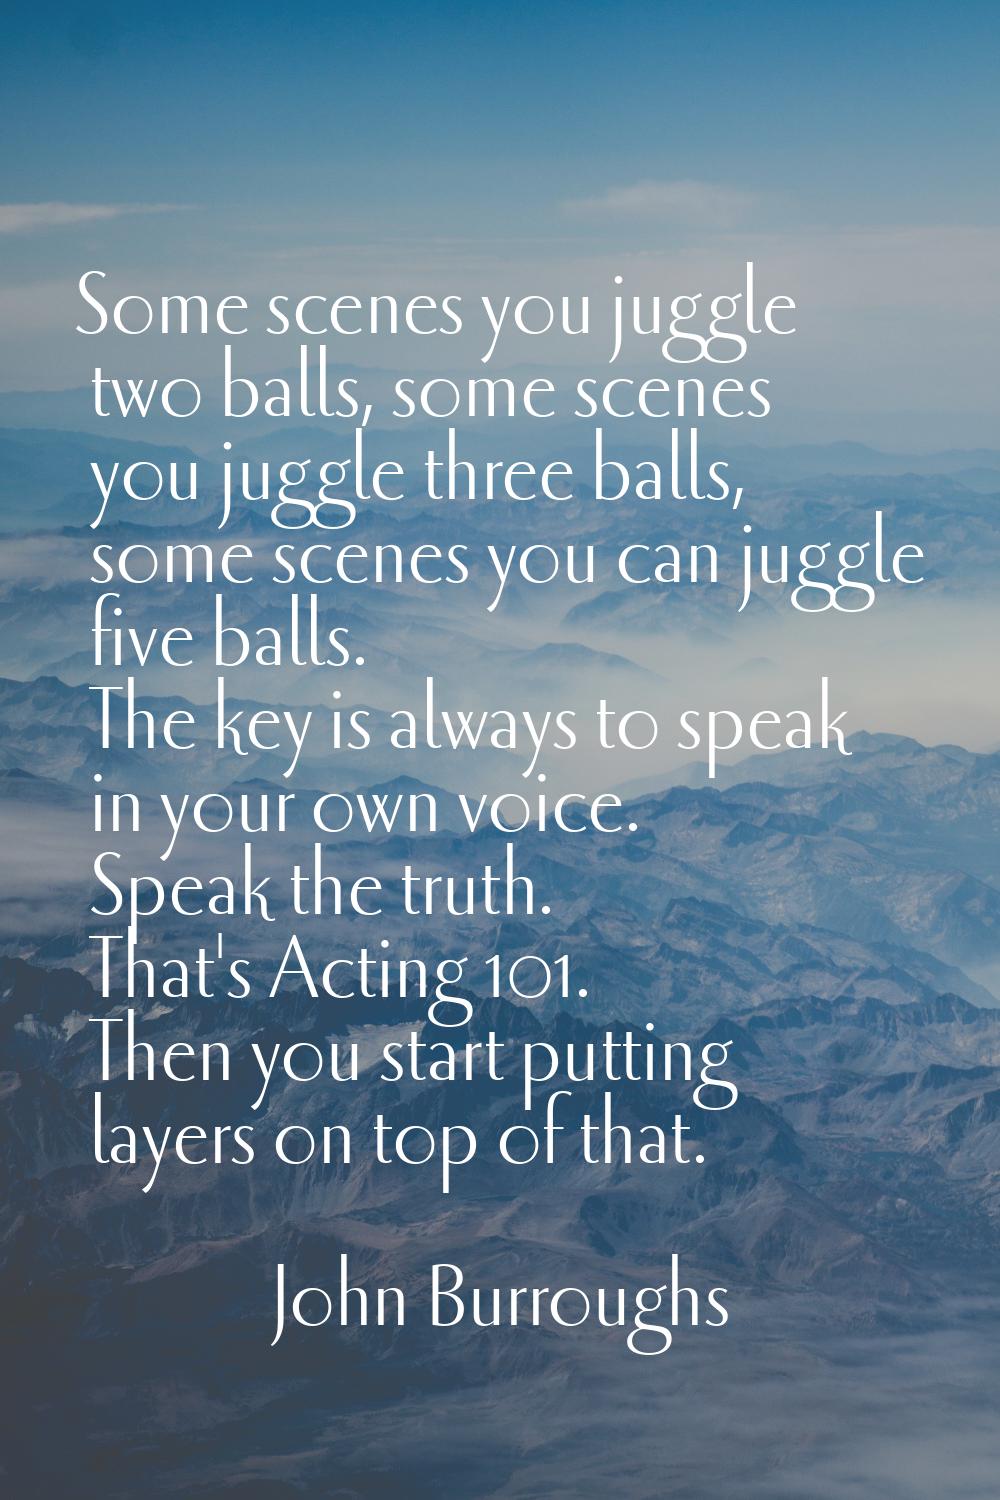 Some scenes you juggle two balls, some scenes you juggle three balls, some scenes you can juggle fi